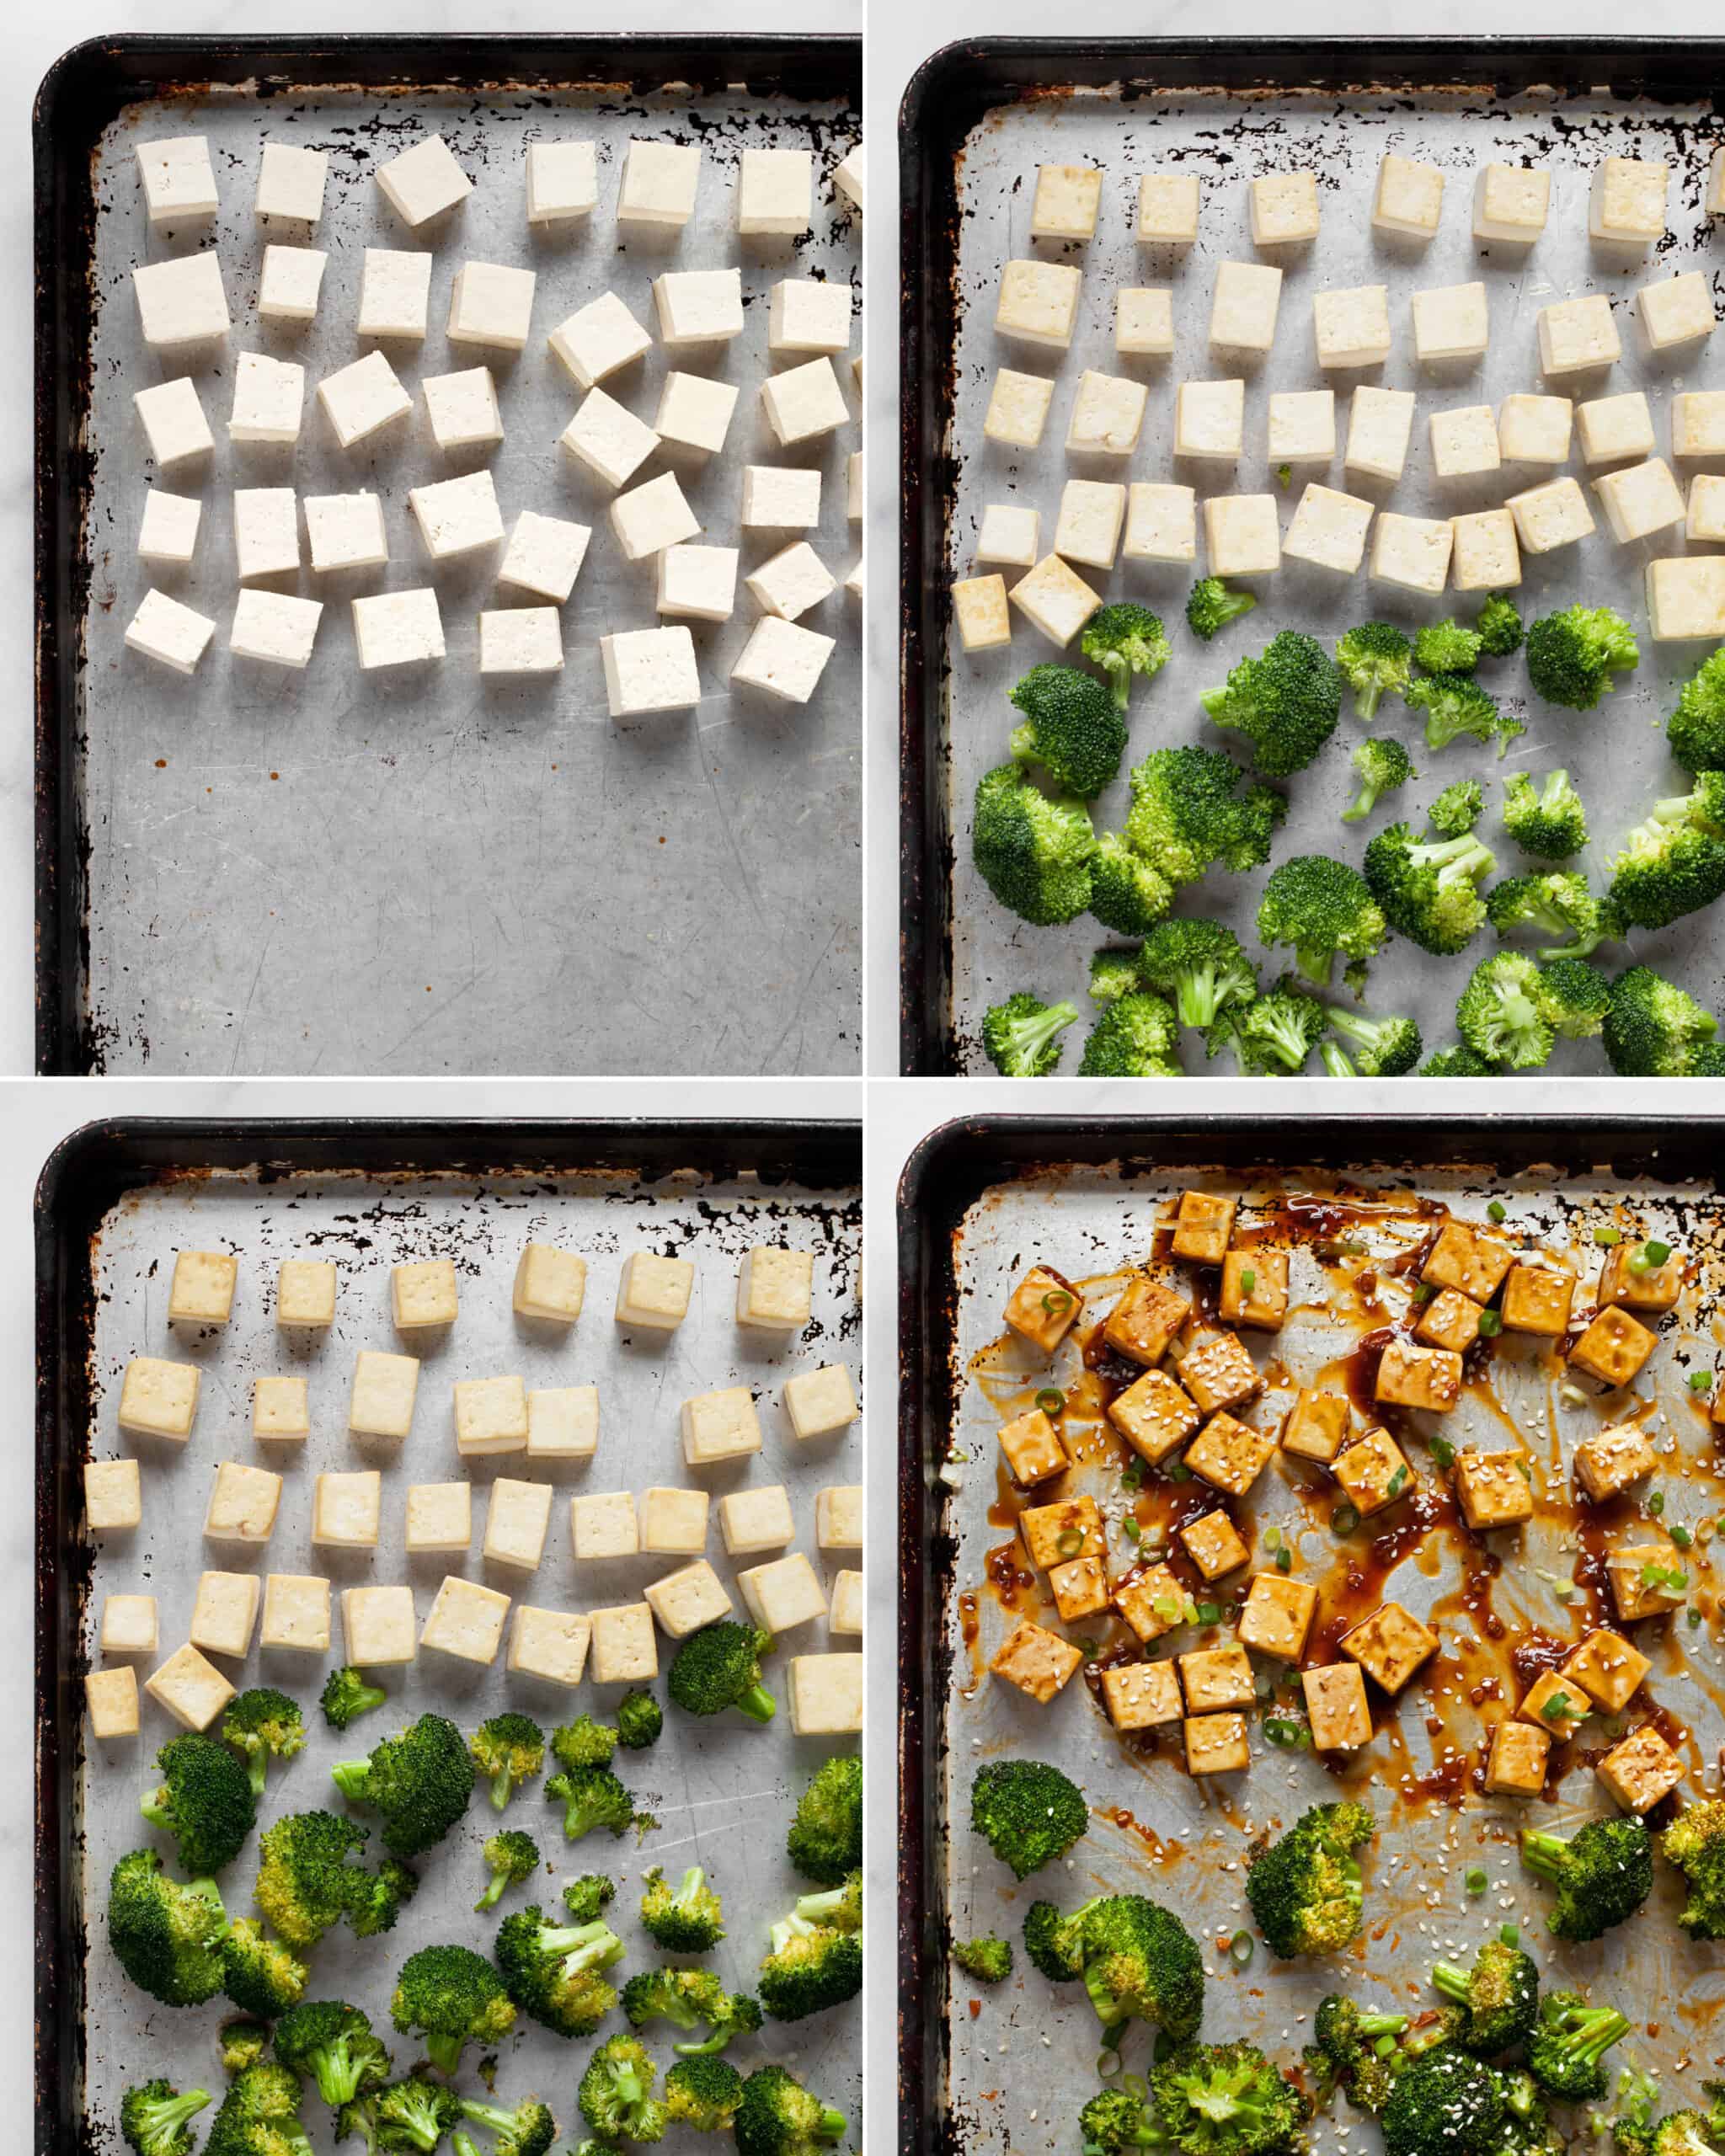 Steps showing how to bake tofu and broccoli on a sheet pan